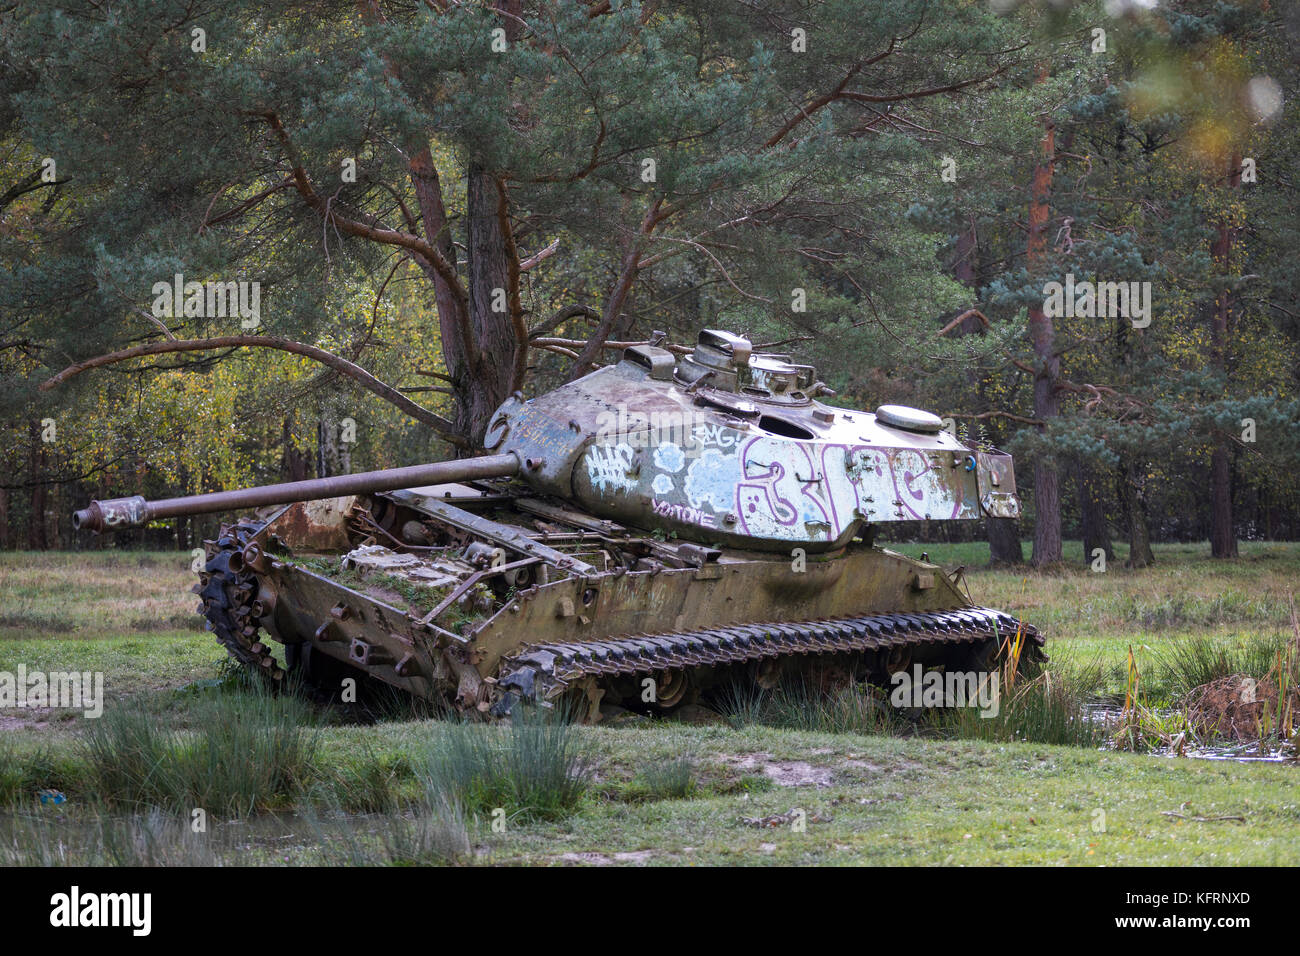 Dumped historical M47 Patton tank left behind in forest Stock Photo